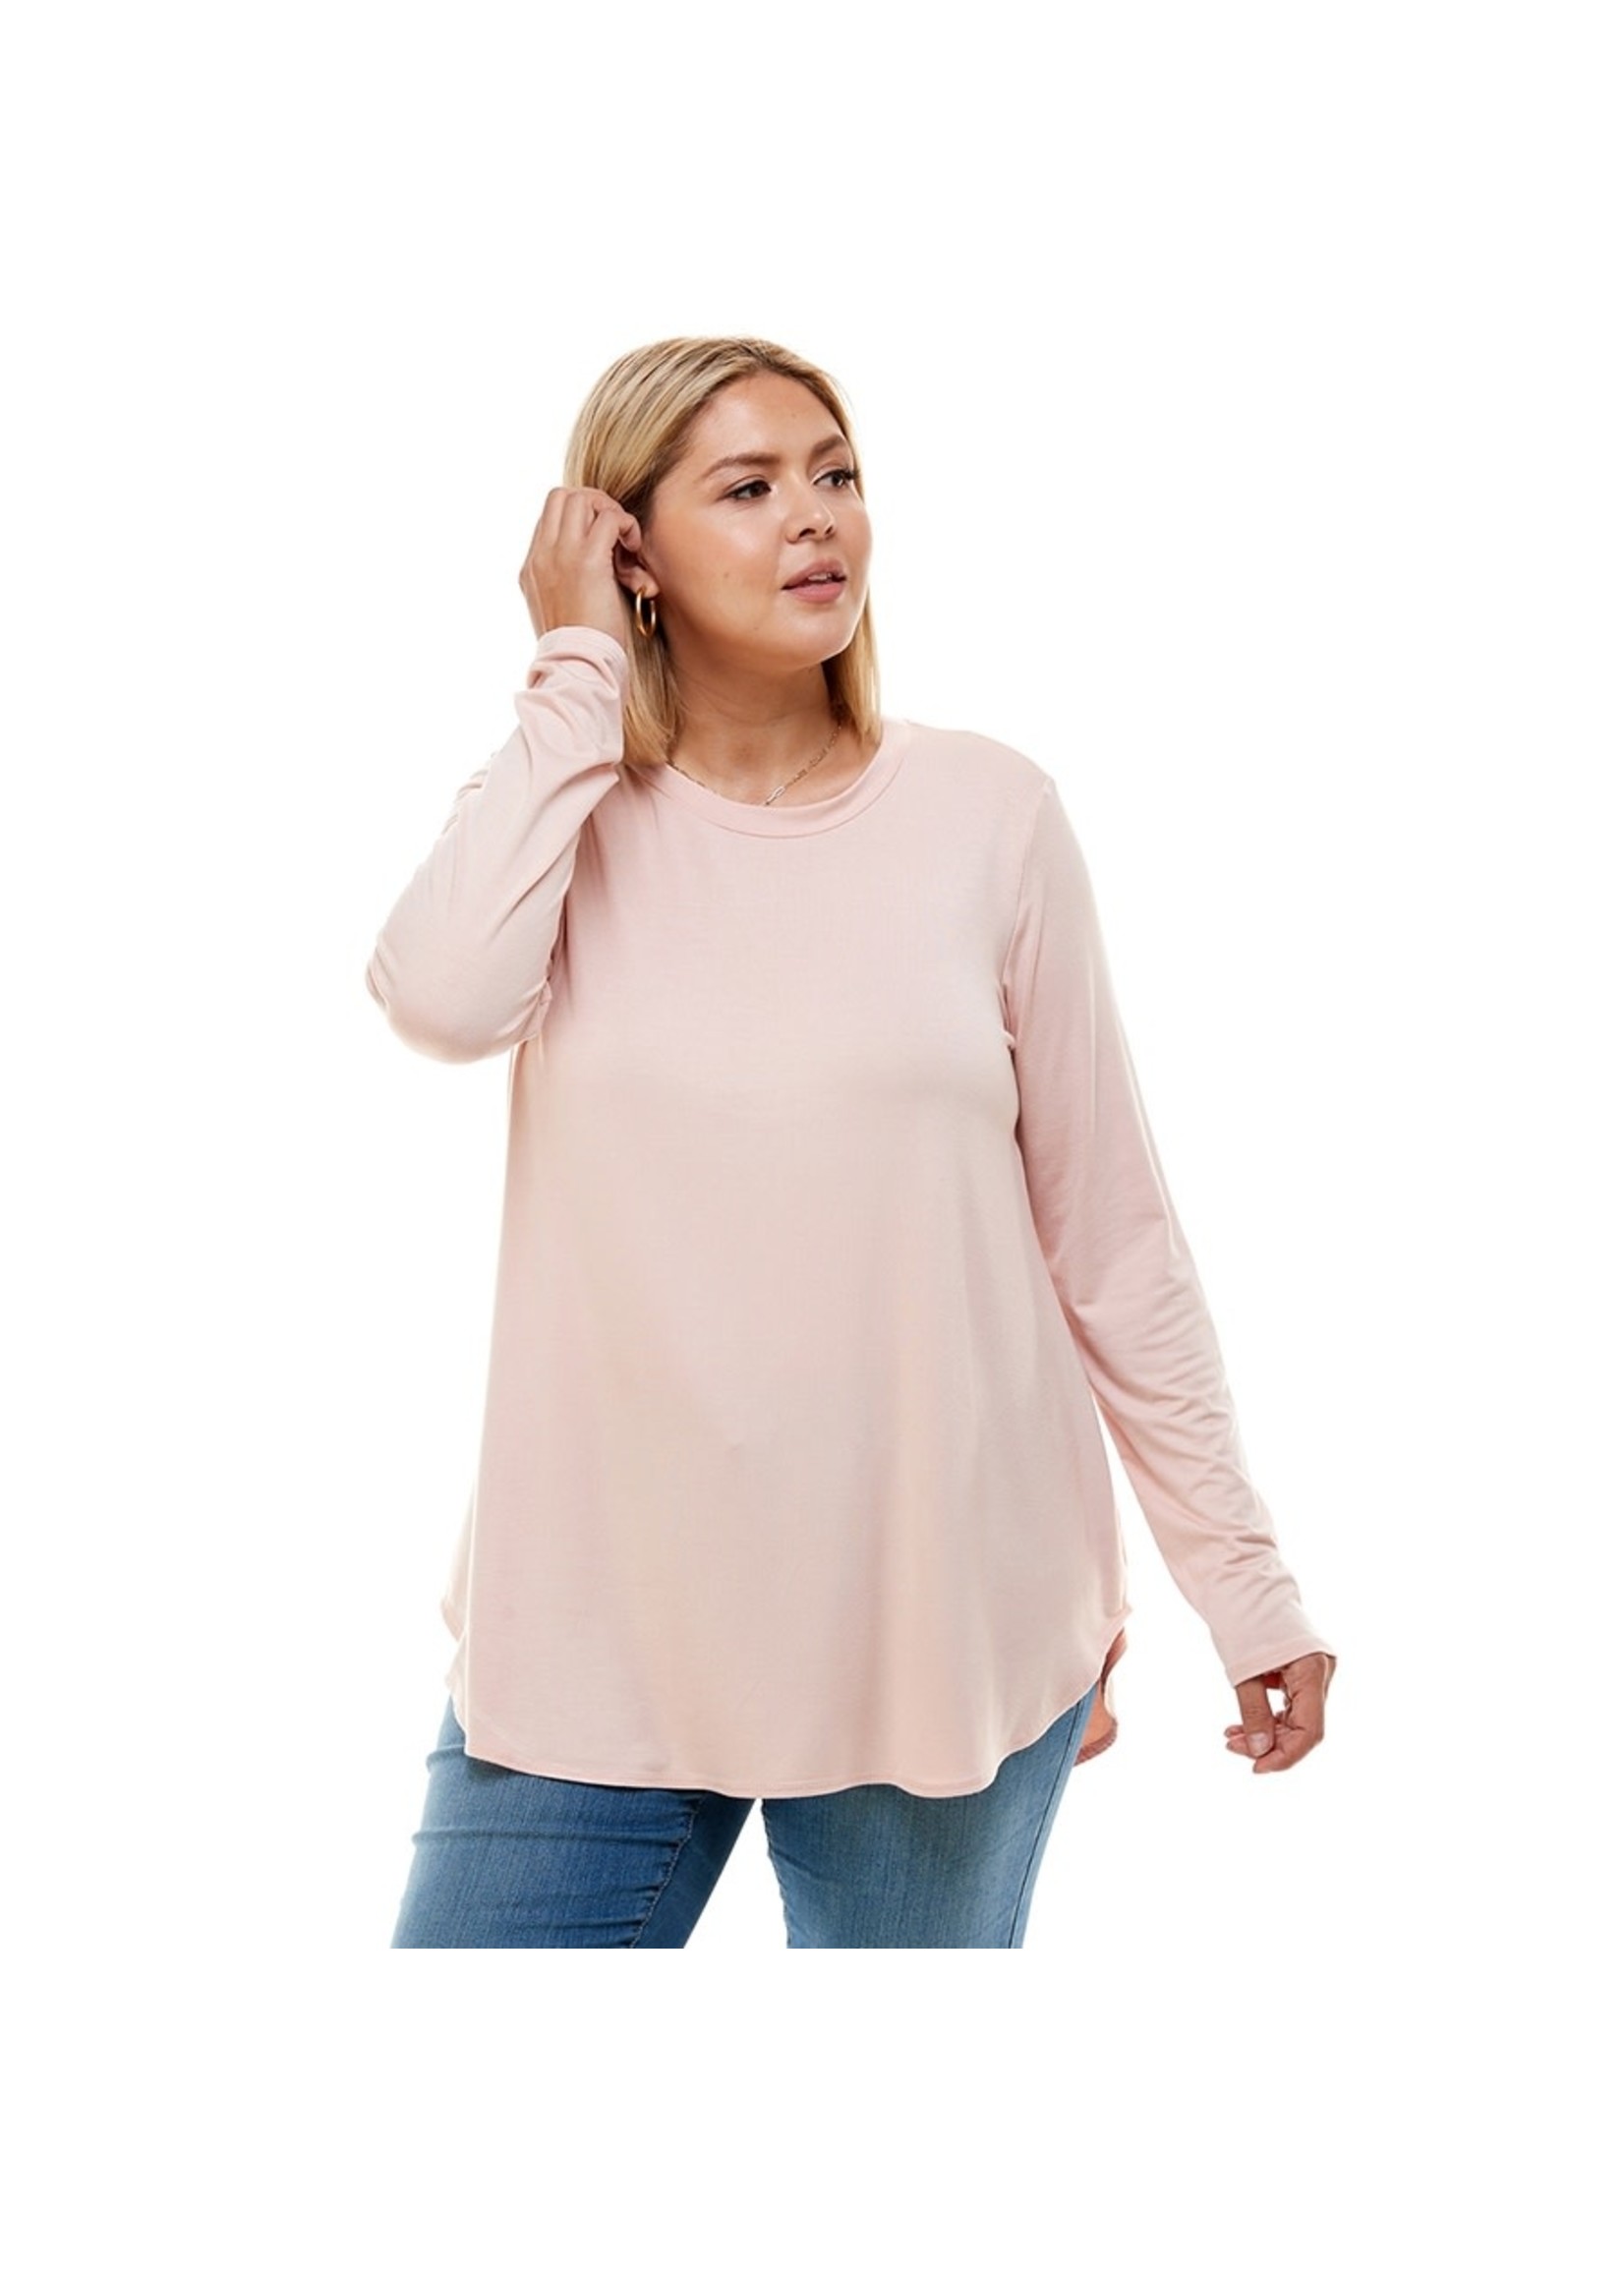 Azules Scoop Neck Long Sleeve Tunic in LT. PEACH